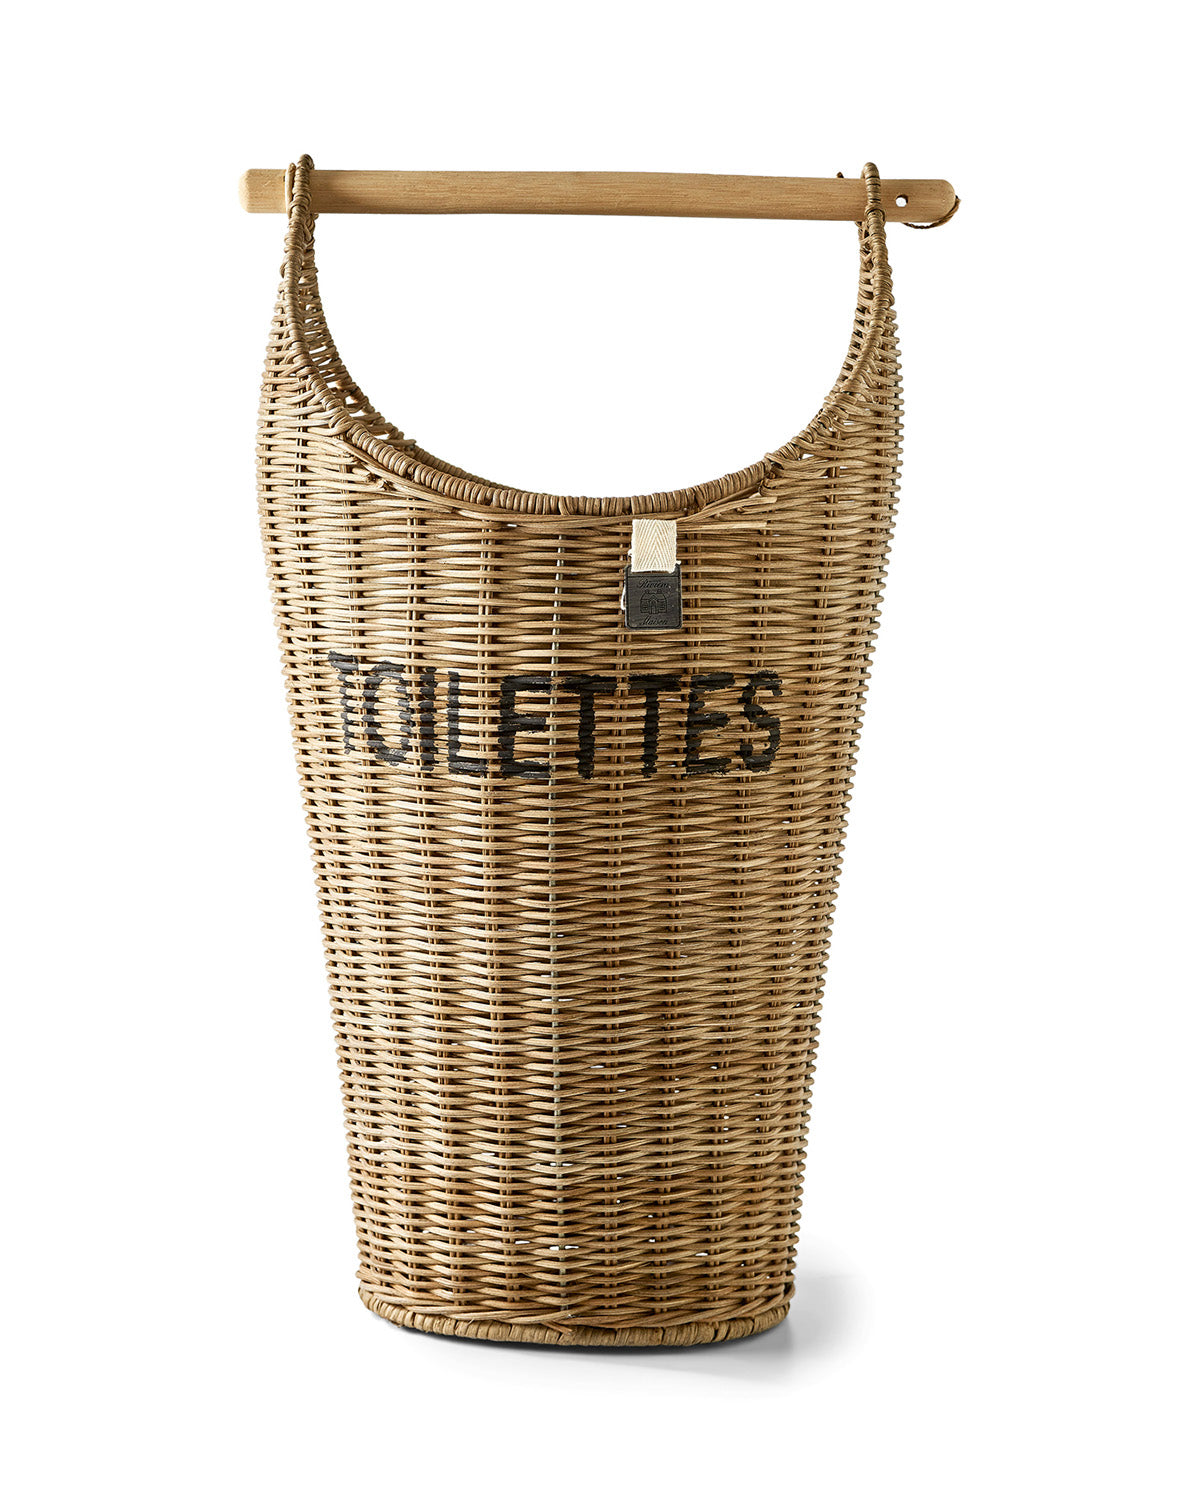 TOILETTES BASKET made from rattan by Riviera Maison